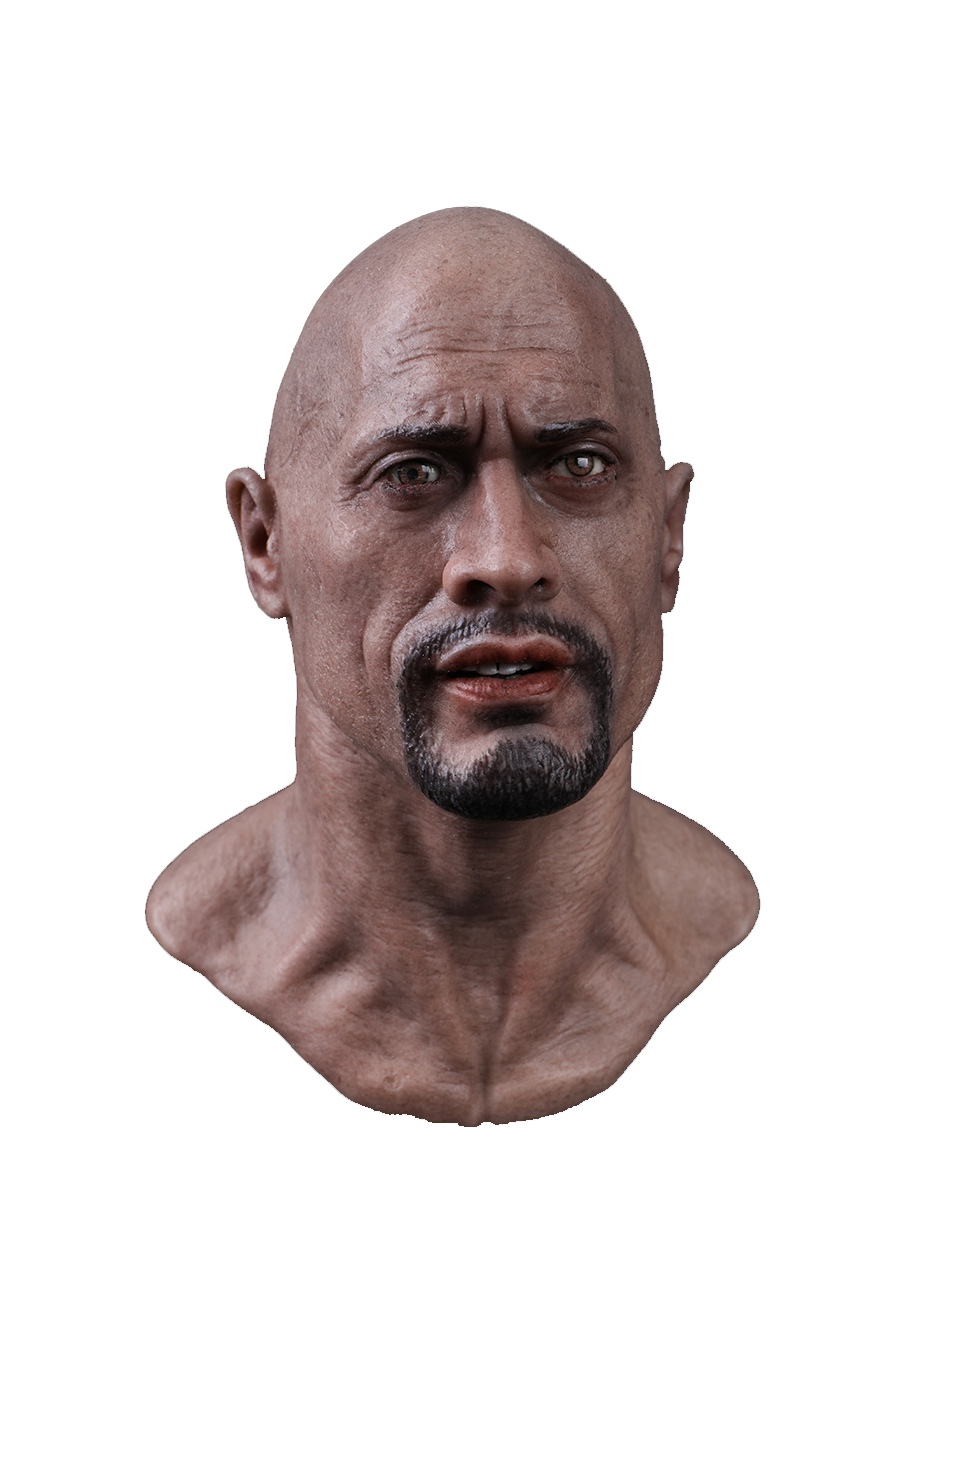 NEW PRODUCT: COOMODEL & CHENTOYS: 1/6 full silicone figurative head carving #SG001 20070910